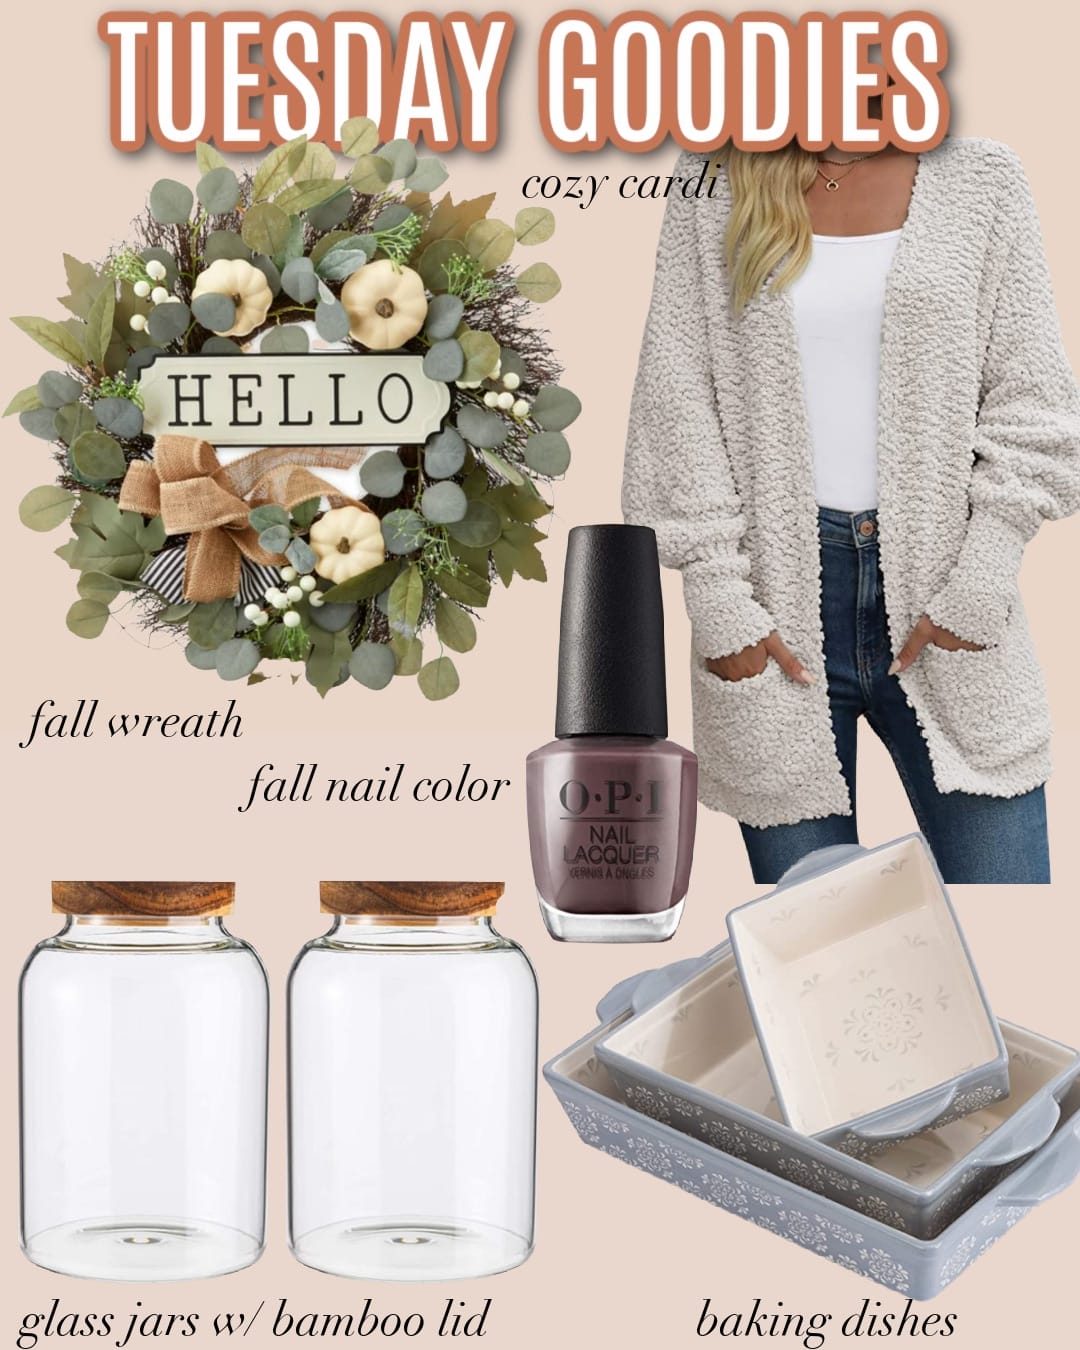 Tuesday Goodies, Fall Wreath, Fall Nail Color, Sweater, Glass Jars and Bamboo Lid, Baking Dishes 